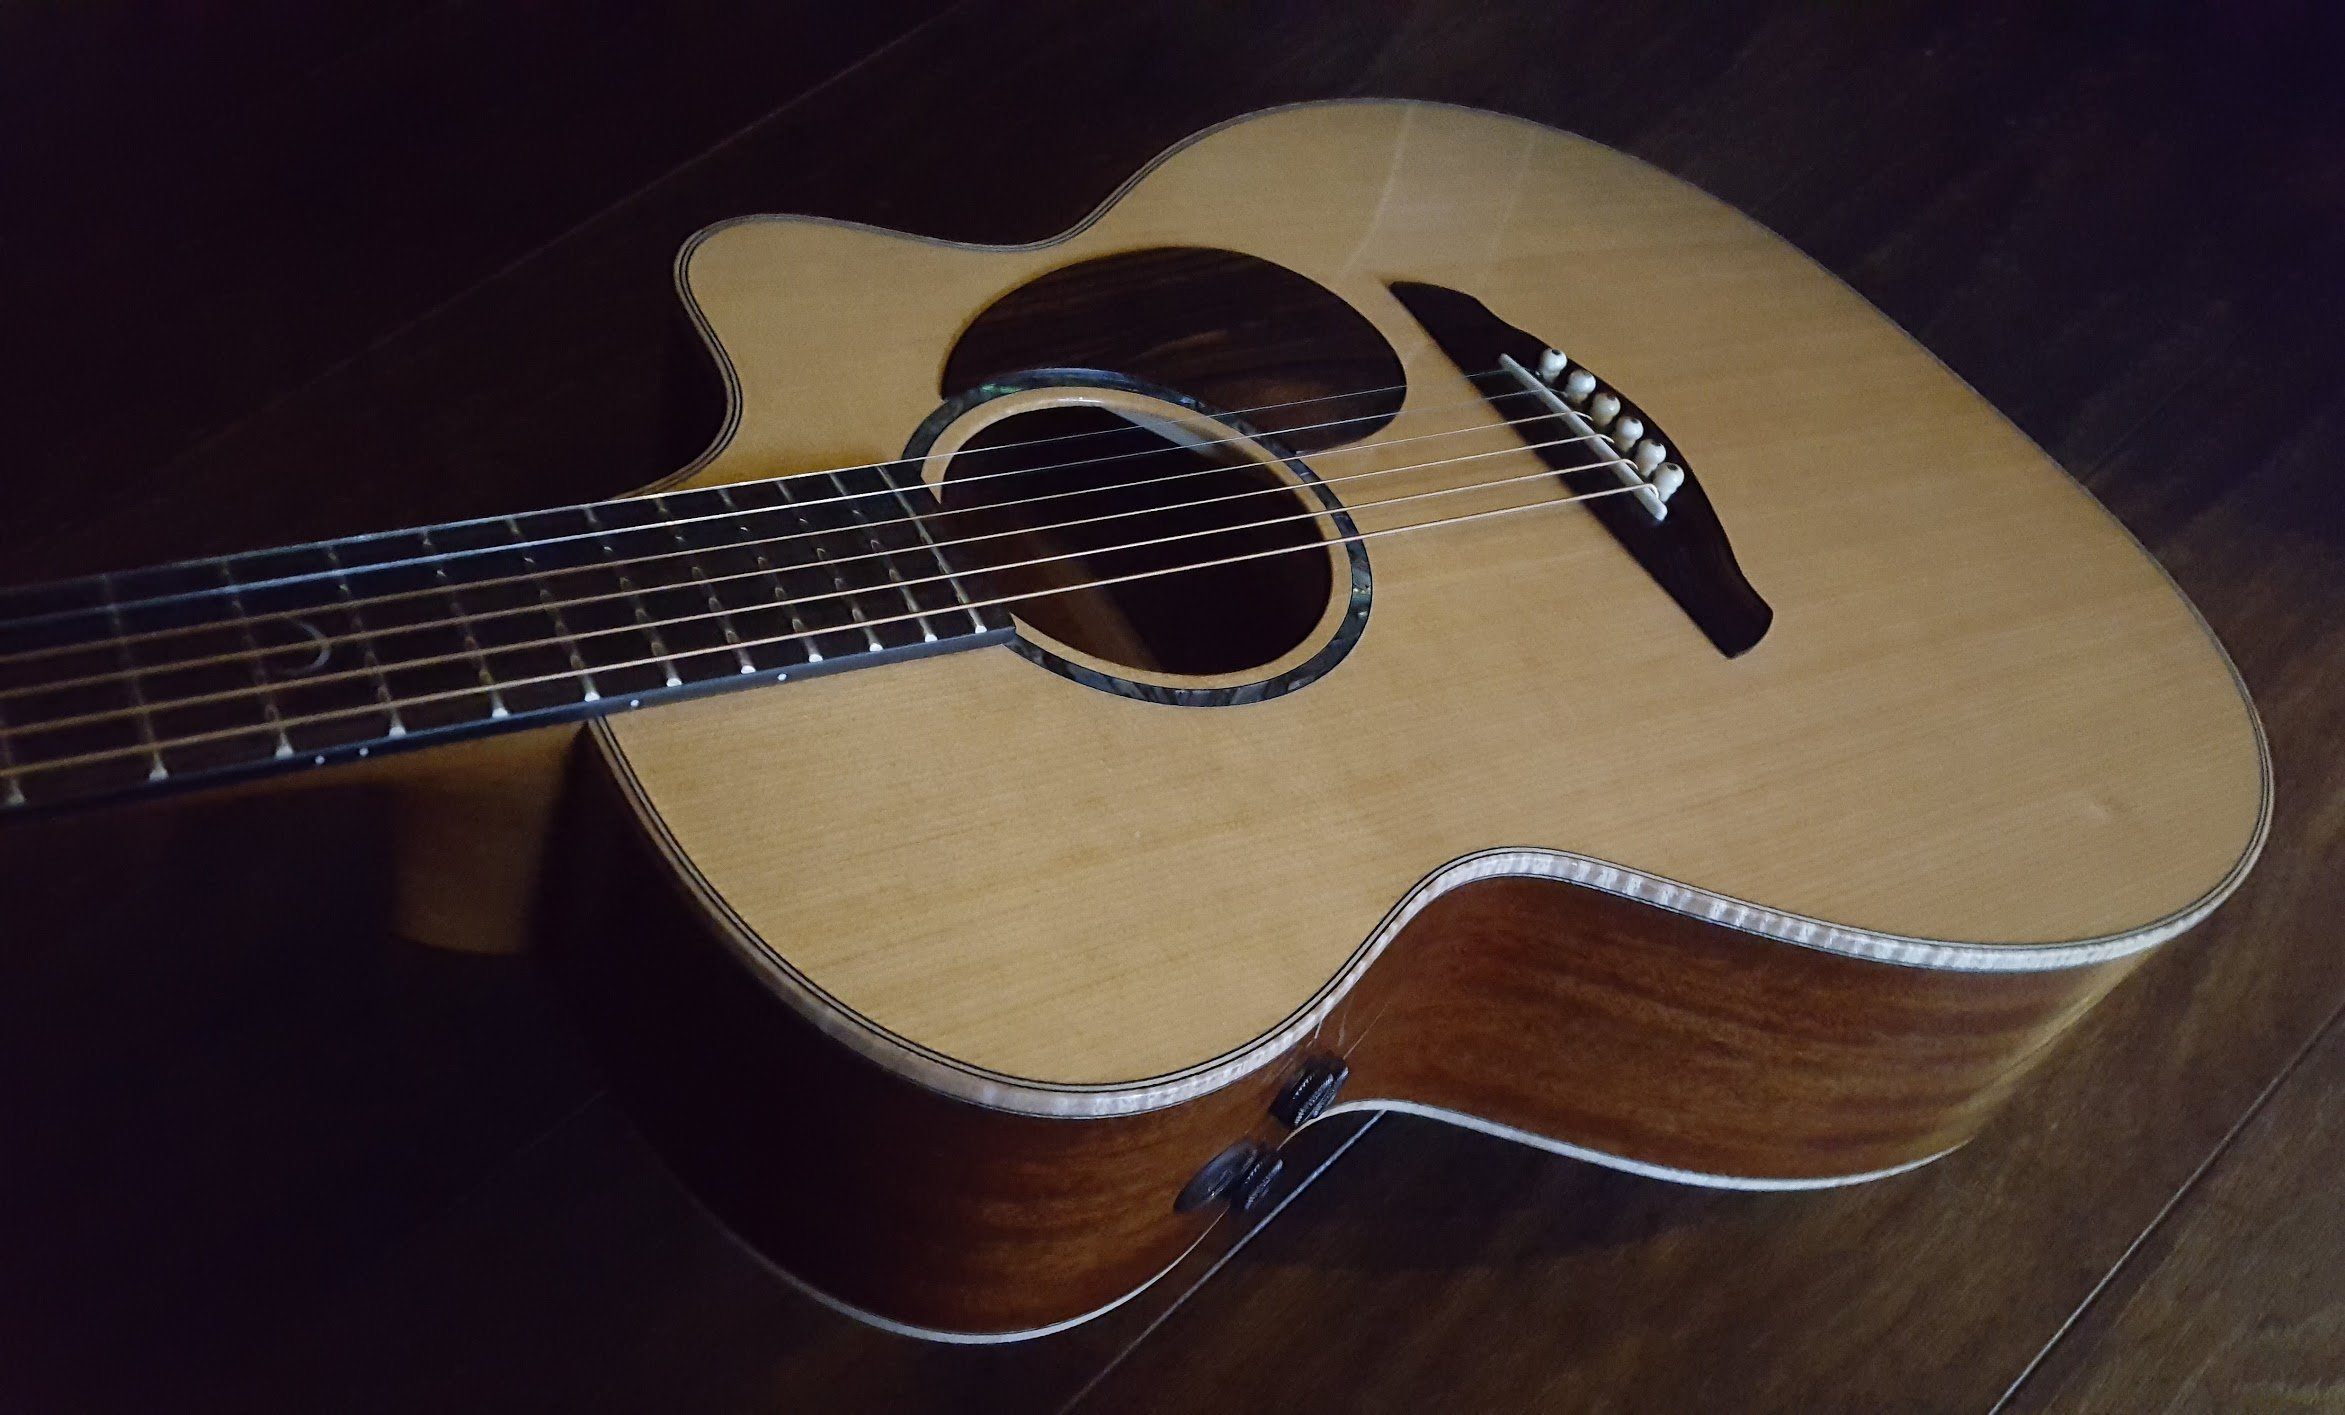 Faith FG1HCE - PJE Legacy Earth Cut/Electro [Used], Electro Acoustic Guitar for sale at Richards Guitars.